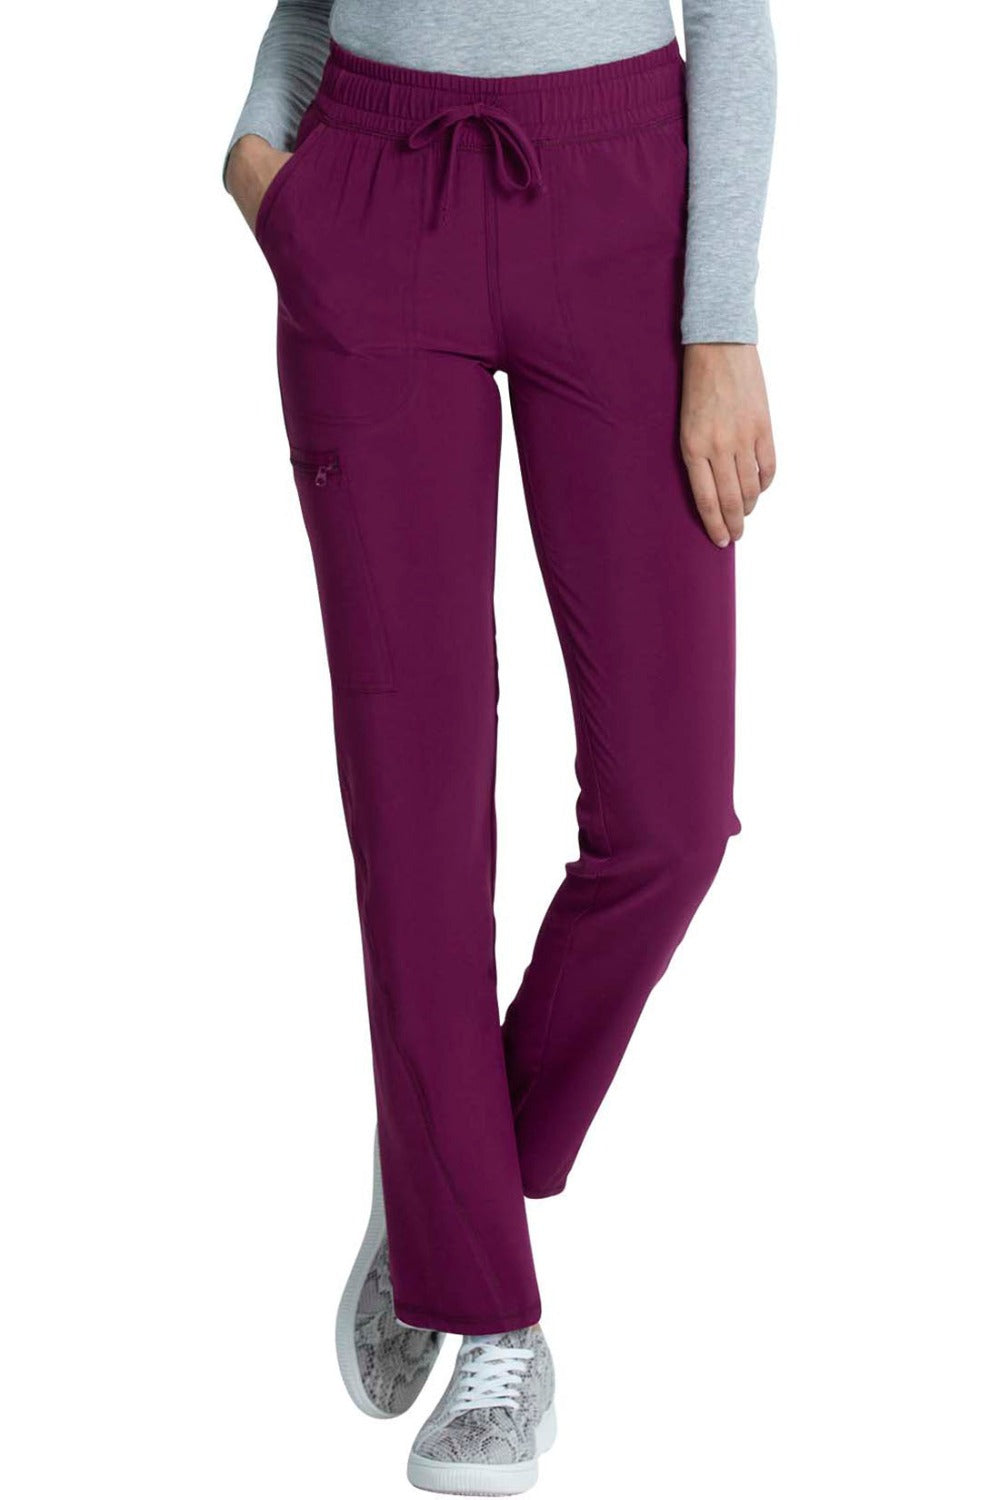 Cherokee Allura Petite Scrub Pant Mid Rise Tapered Leg Drawstring in Wine at Parker's Clothing and Shoes.